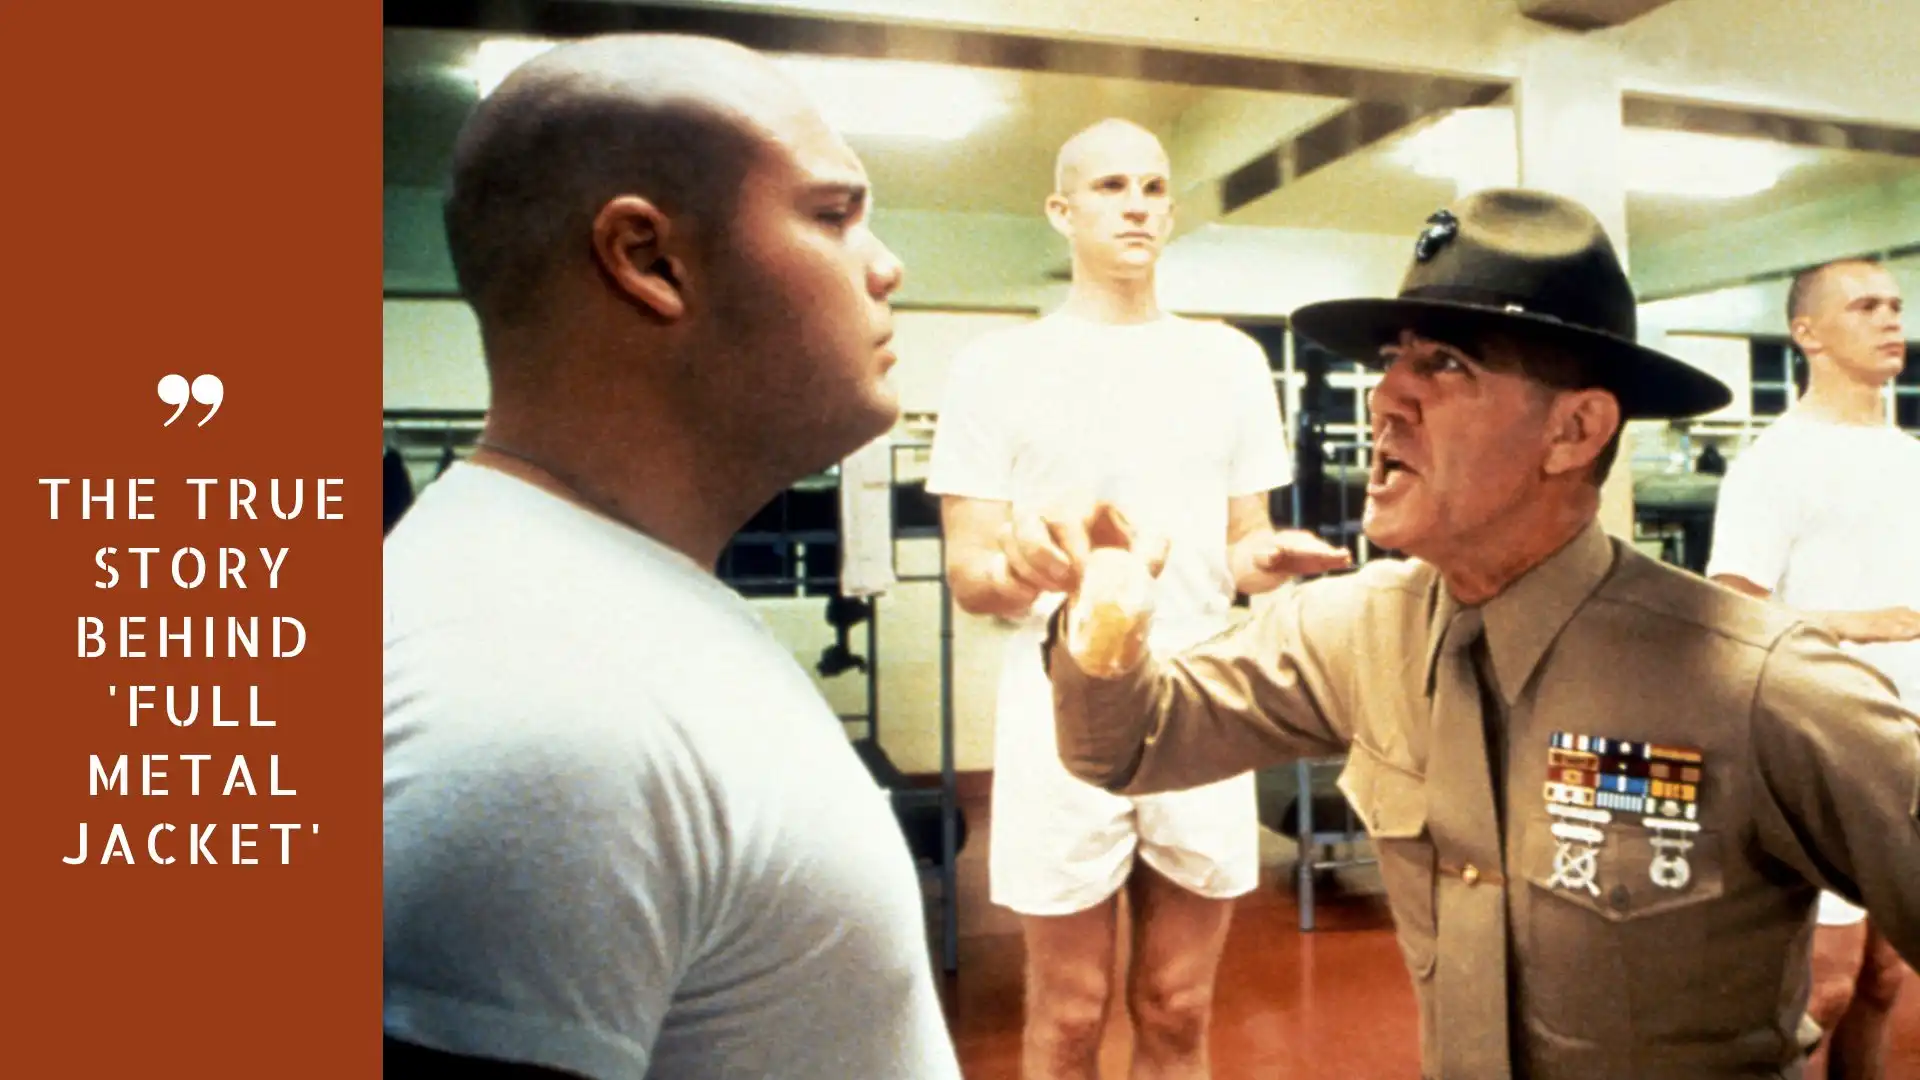 The true story behind 'Full Metal Jacket' (Image credit: NYCTime)